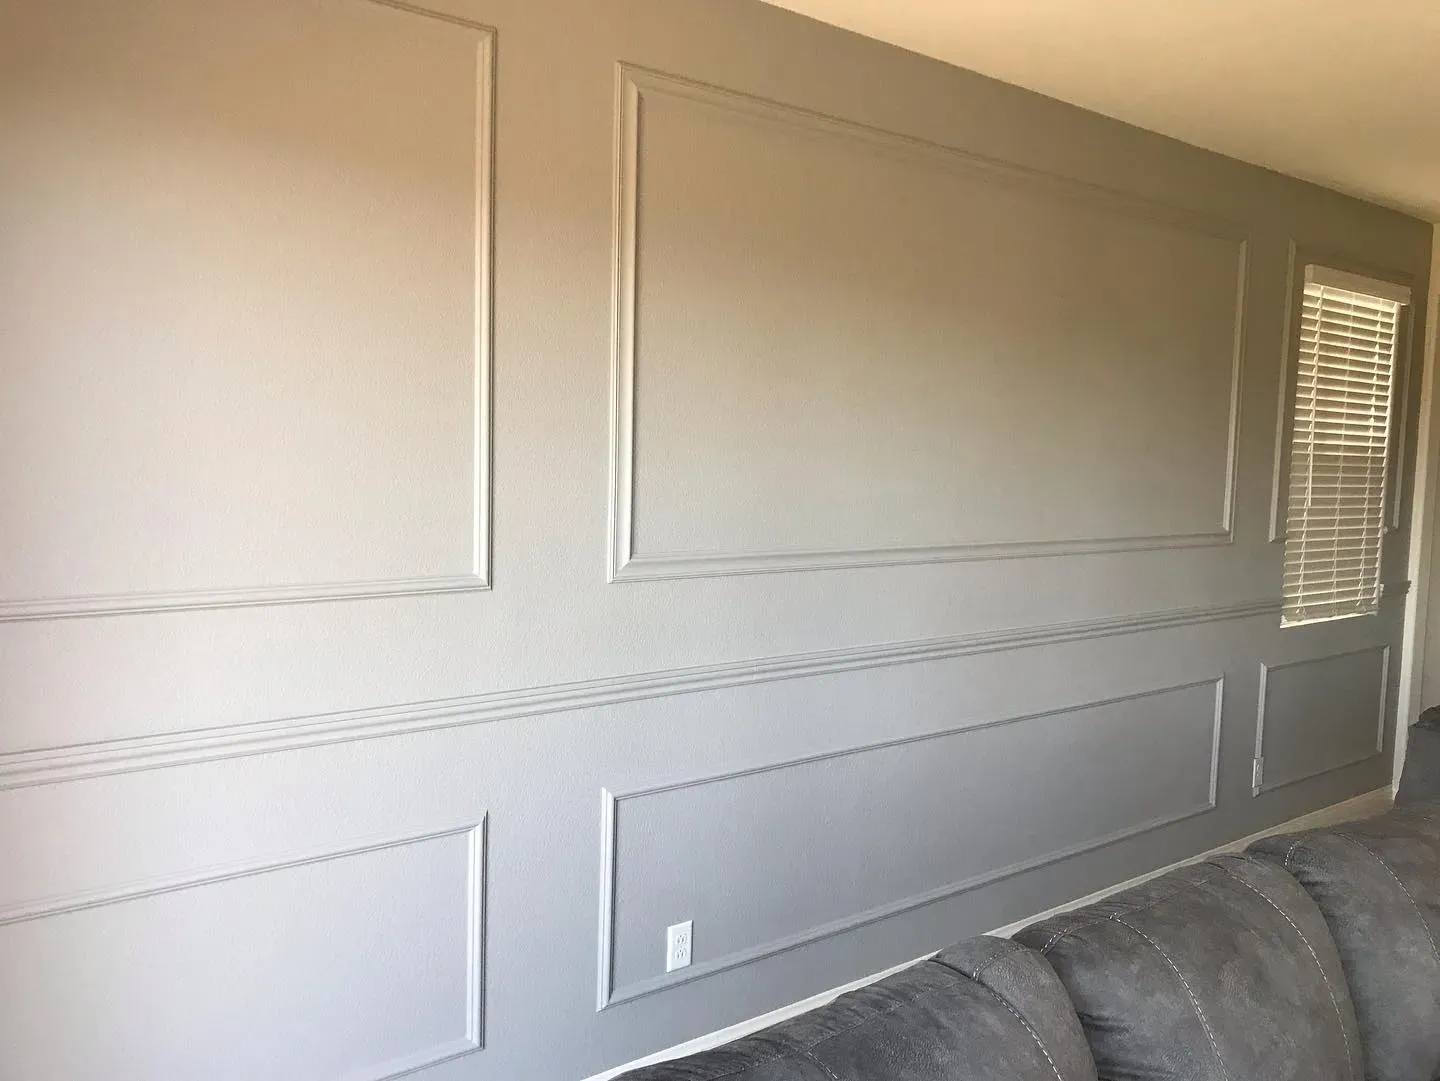 Behr Sonic Silver living room paint